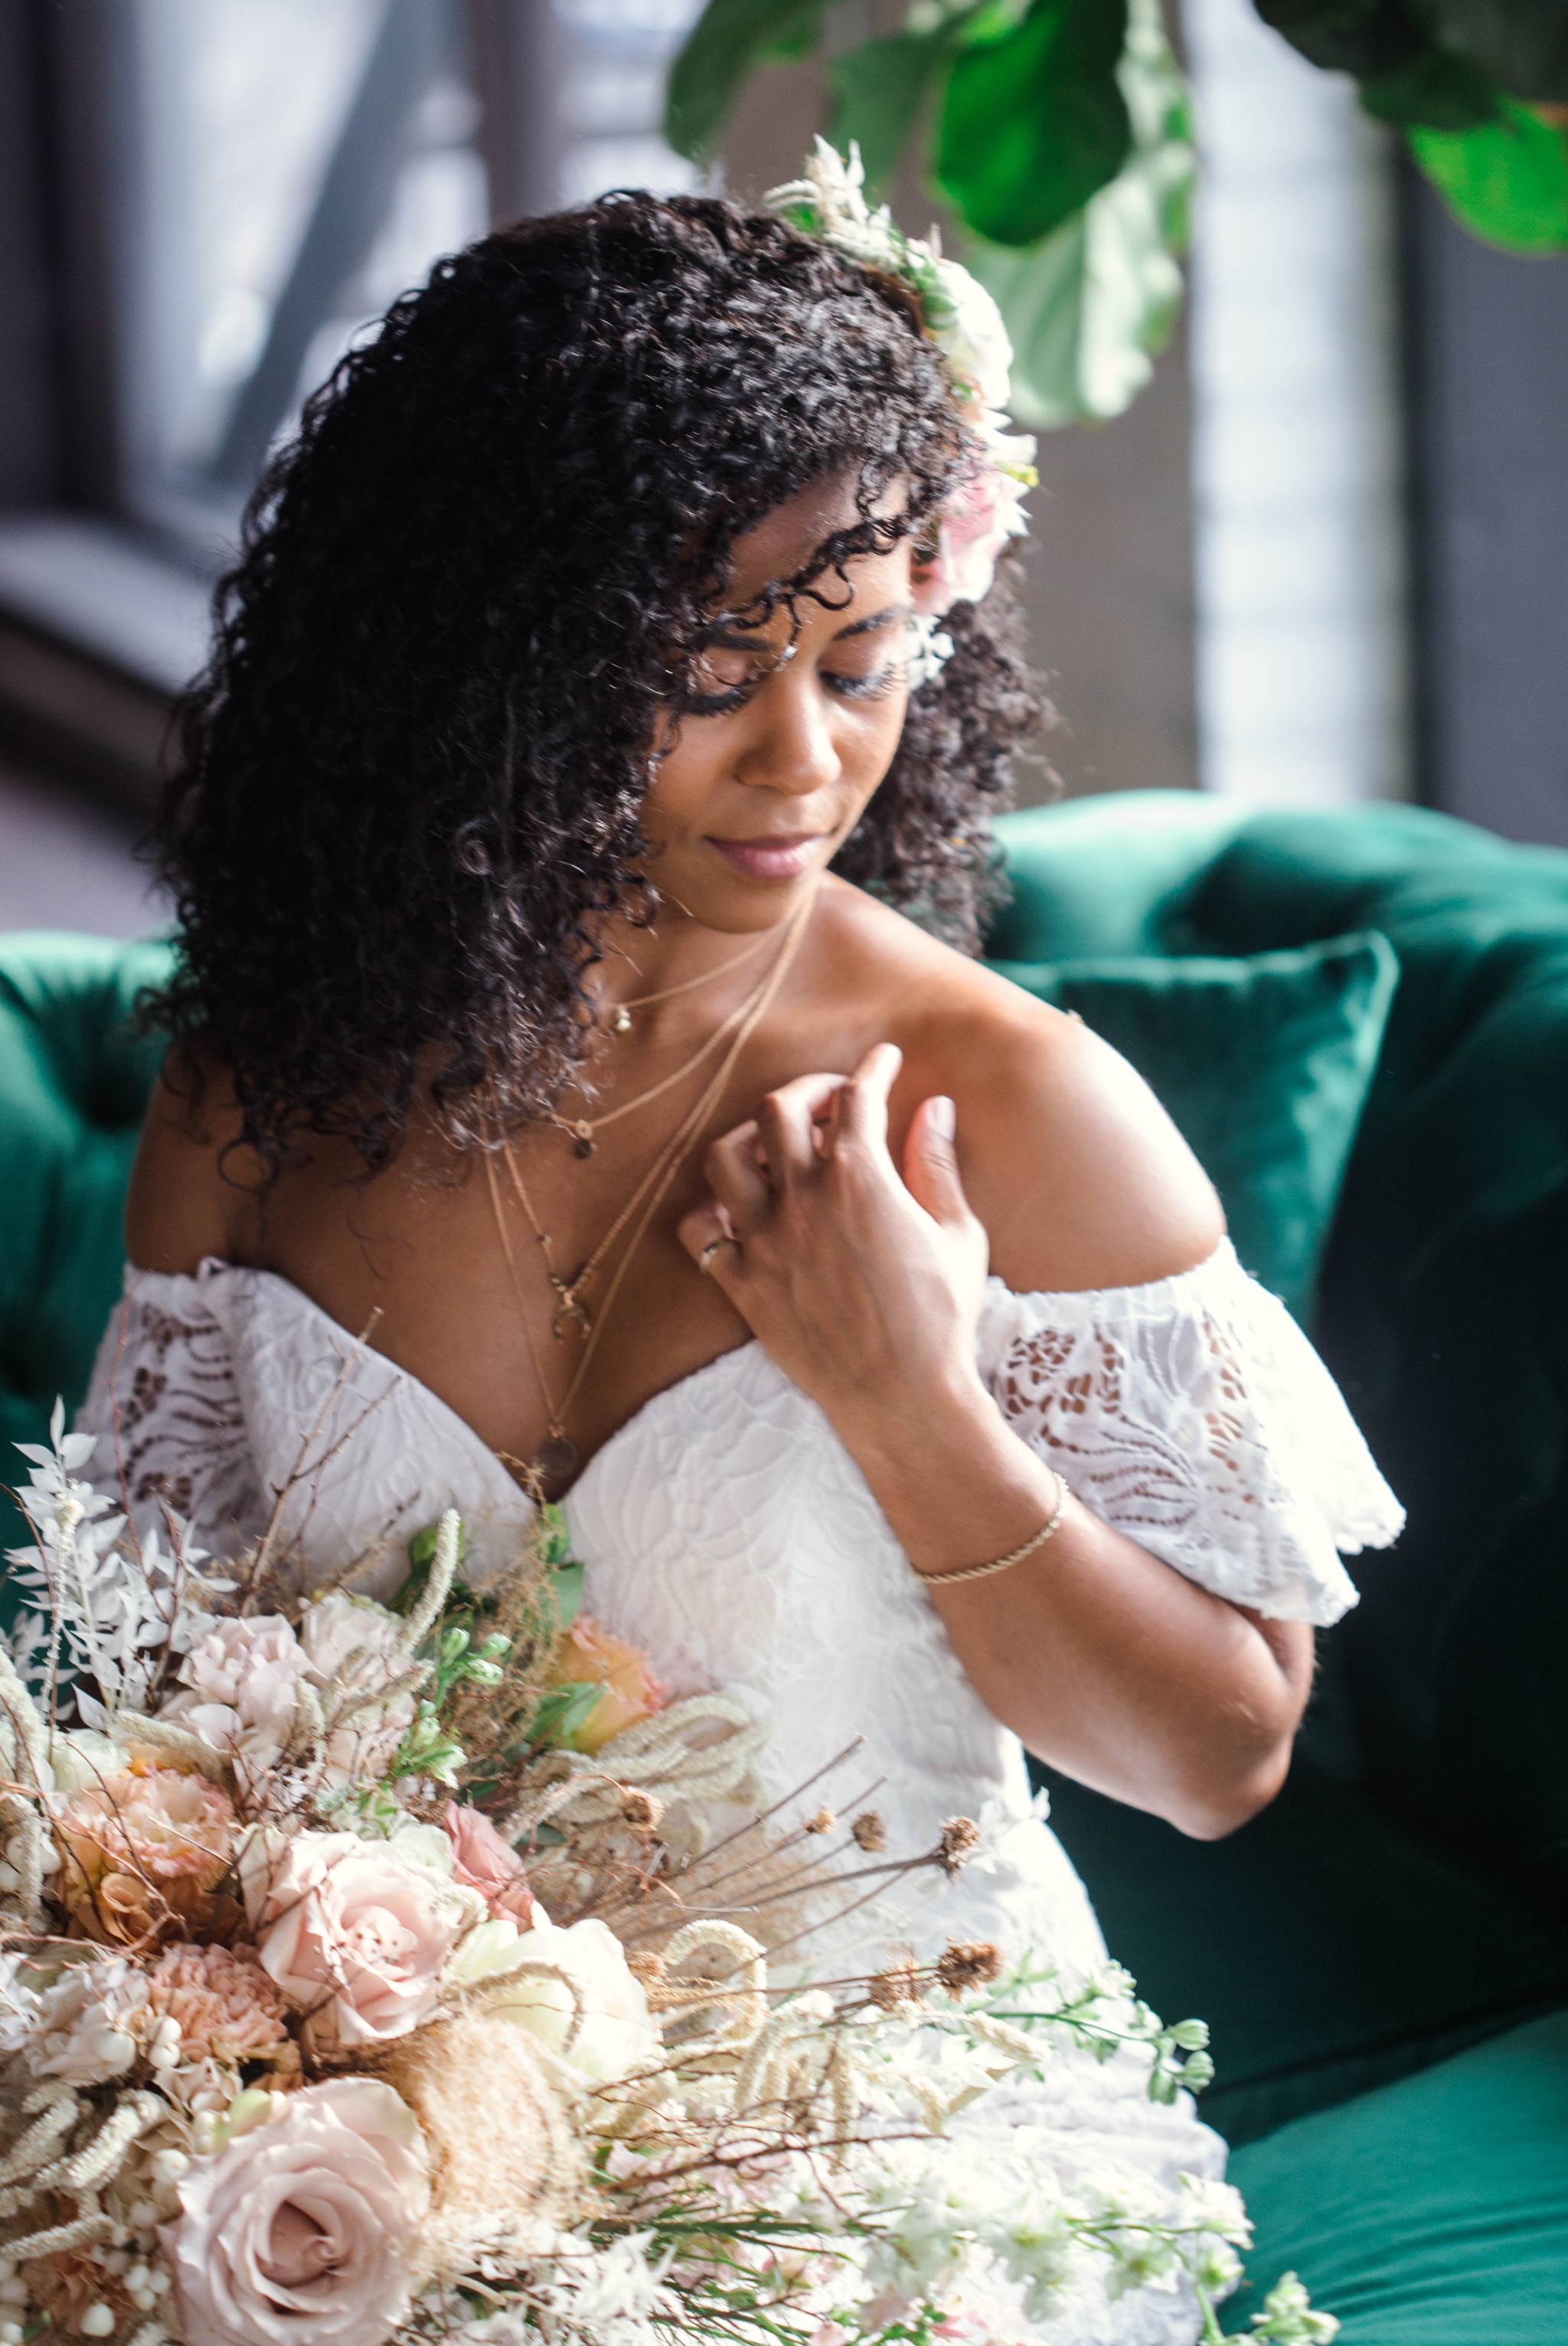 Indoor Natural light portrait of a black bride in a boho wedding dress sitting on an emerald tufted sofa - flowers in natural african american hair - oahu hawaii wedding photographer